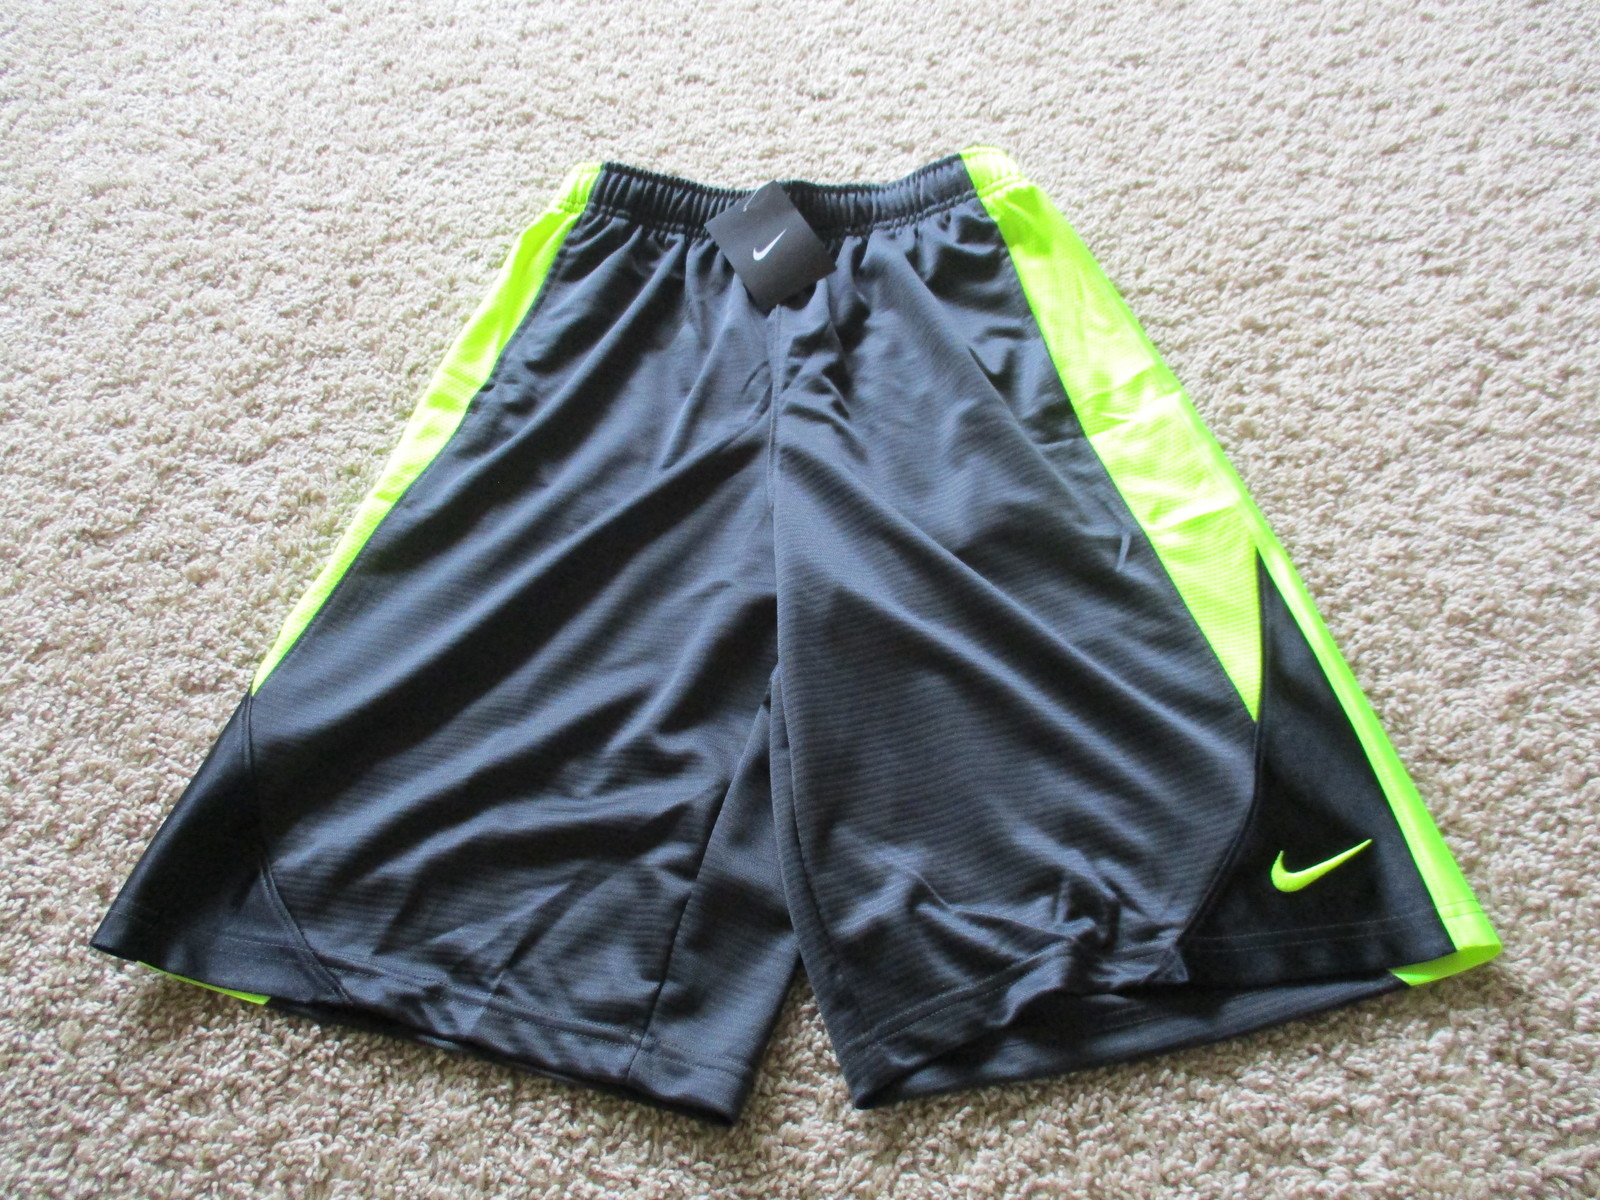 Primary image for BNWT Nike athletic shorts, boys, dark grey/fluorescent, Size L, pockets